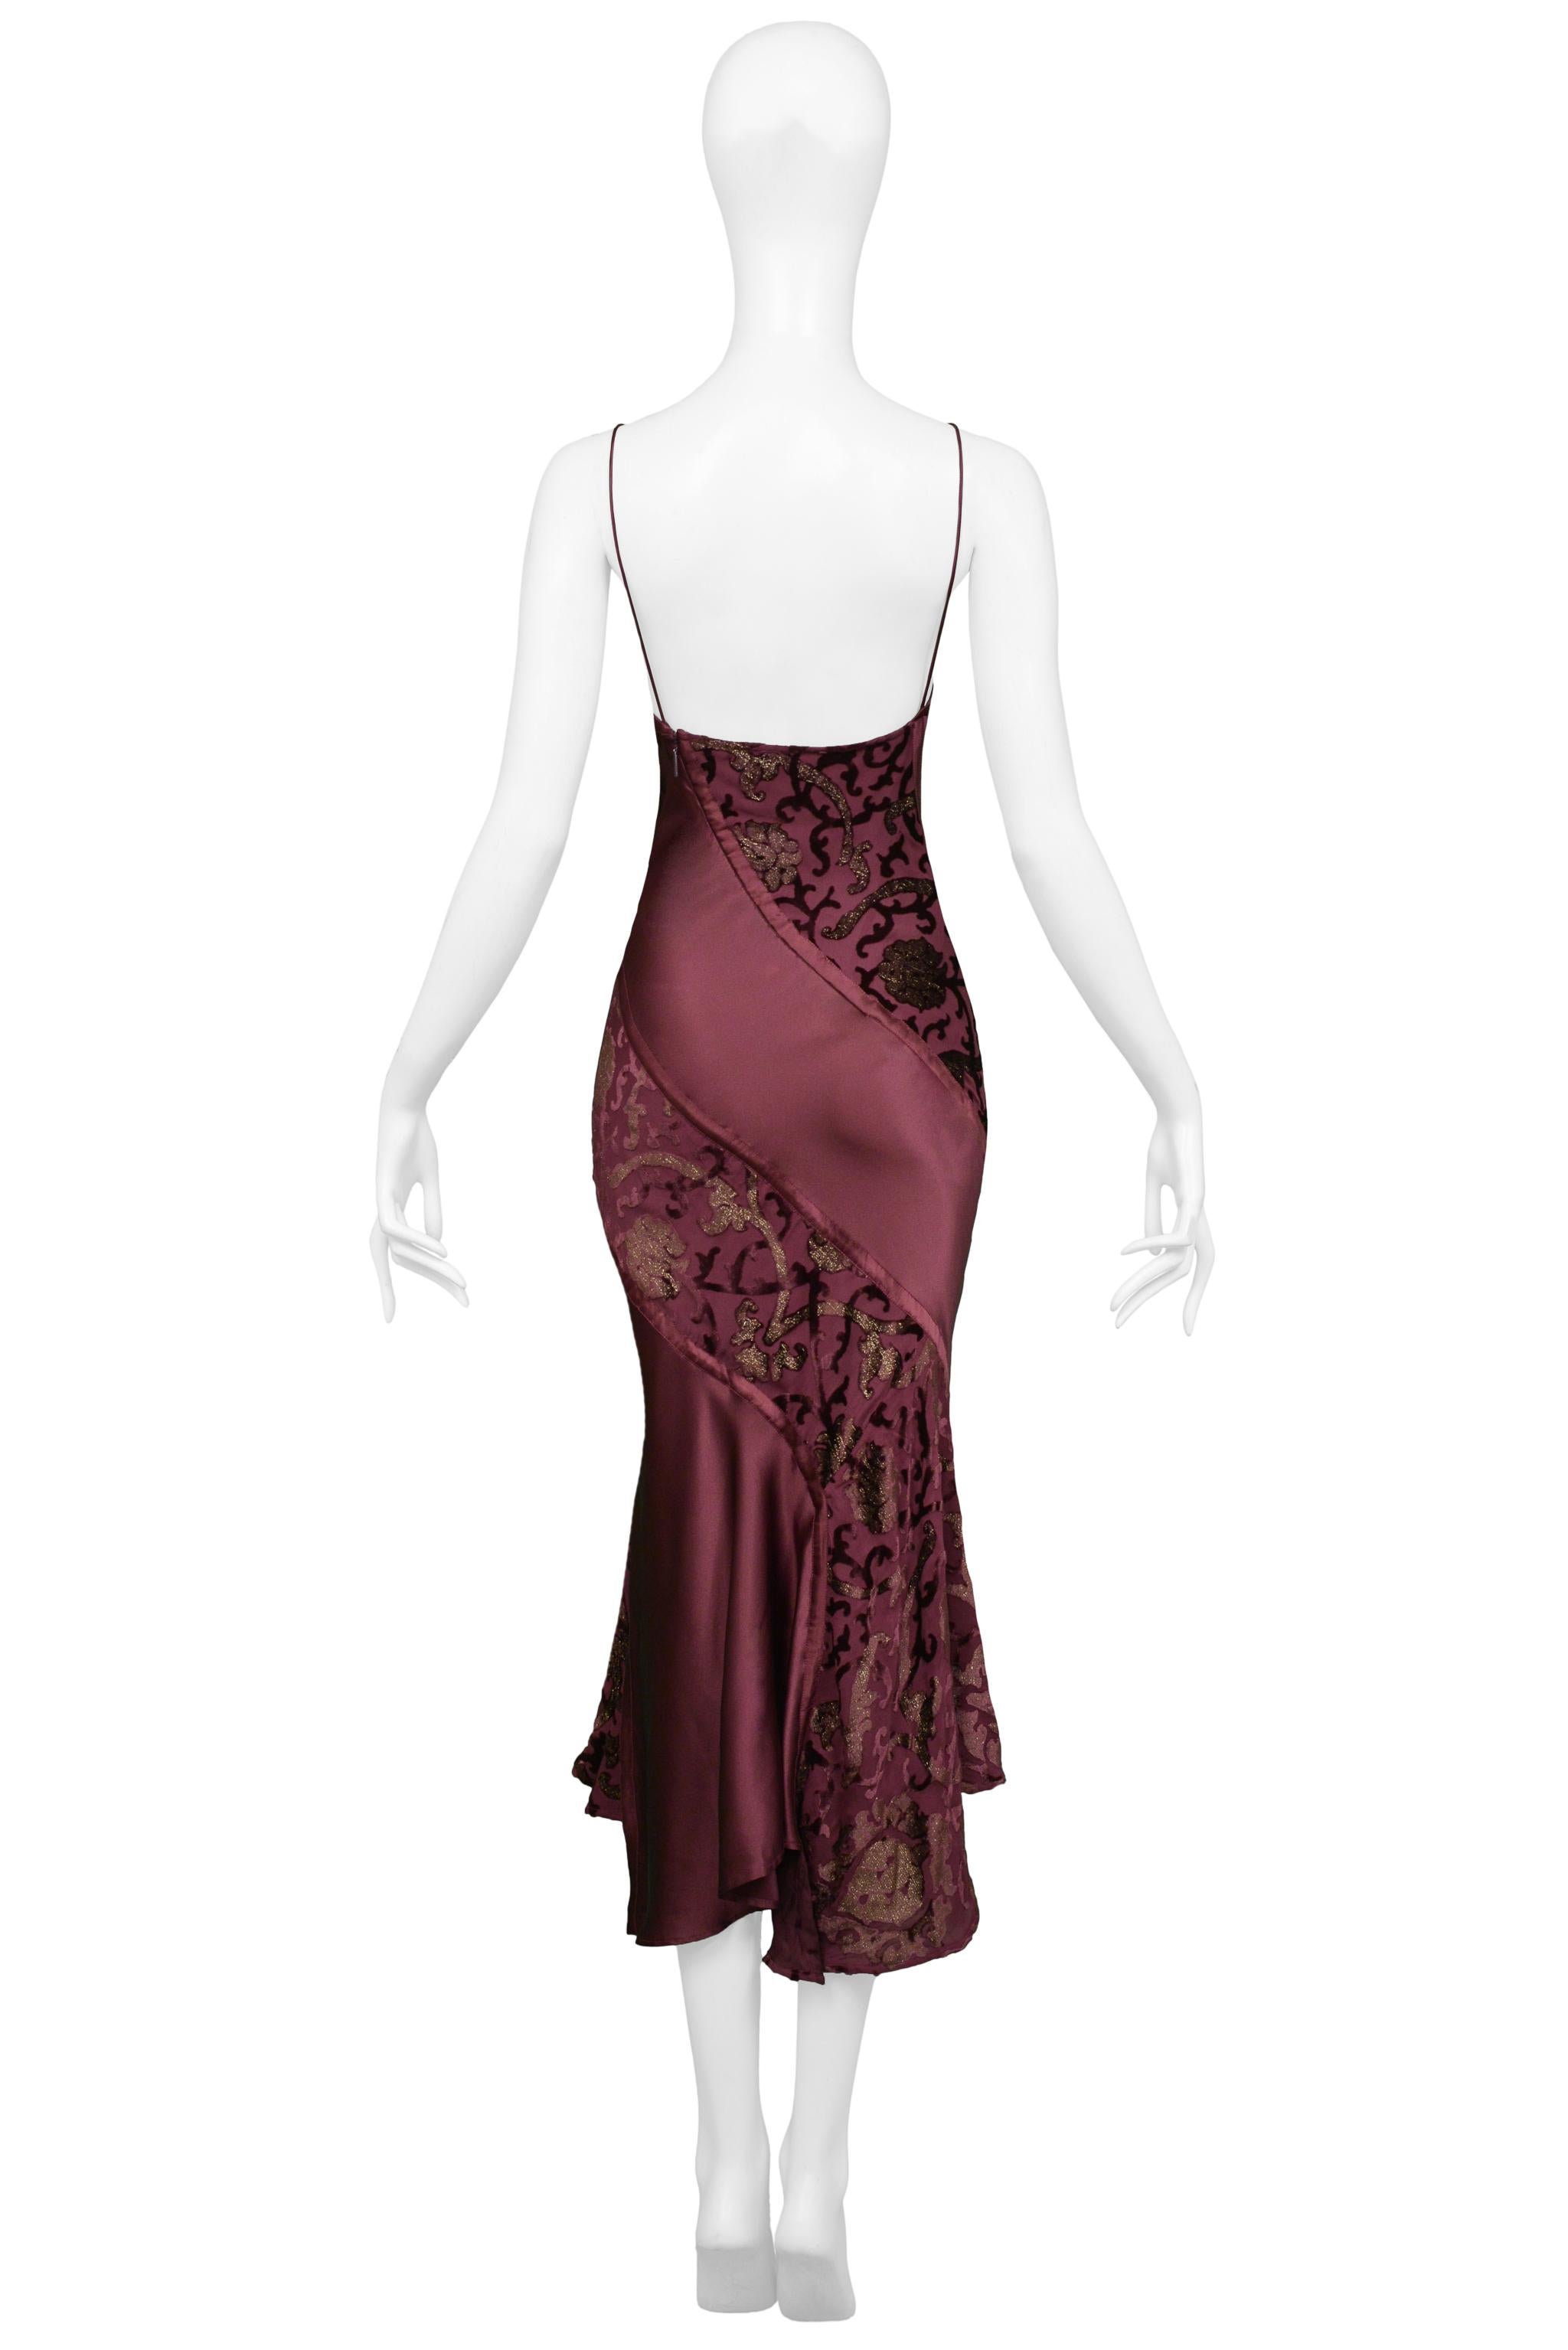 Roberto Cavalli Burgundy Satin Slip Dress With Gold Metallic Print In Excellent Condition For Sale In Los Angeles, CA